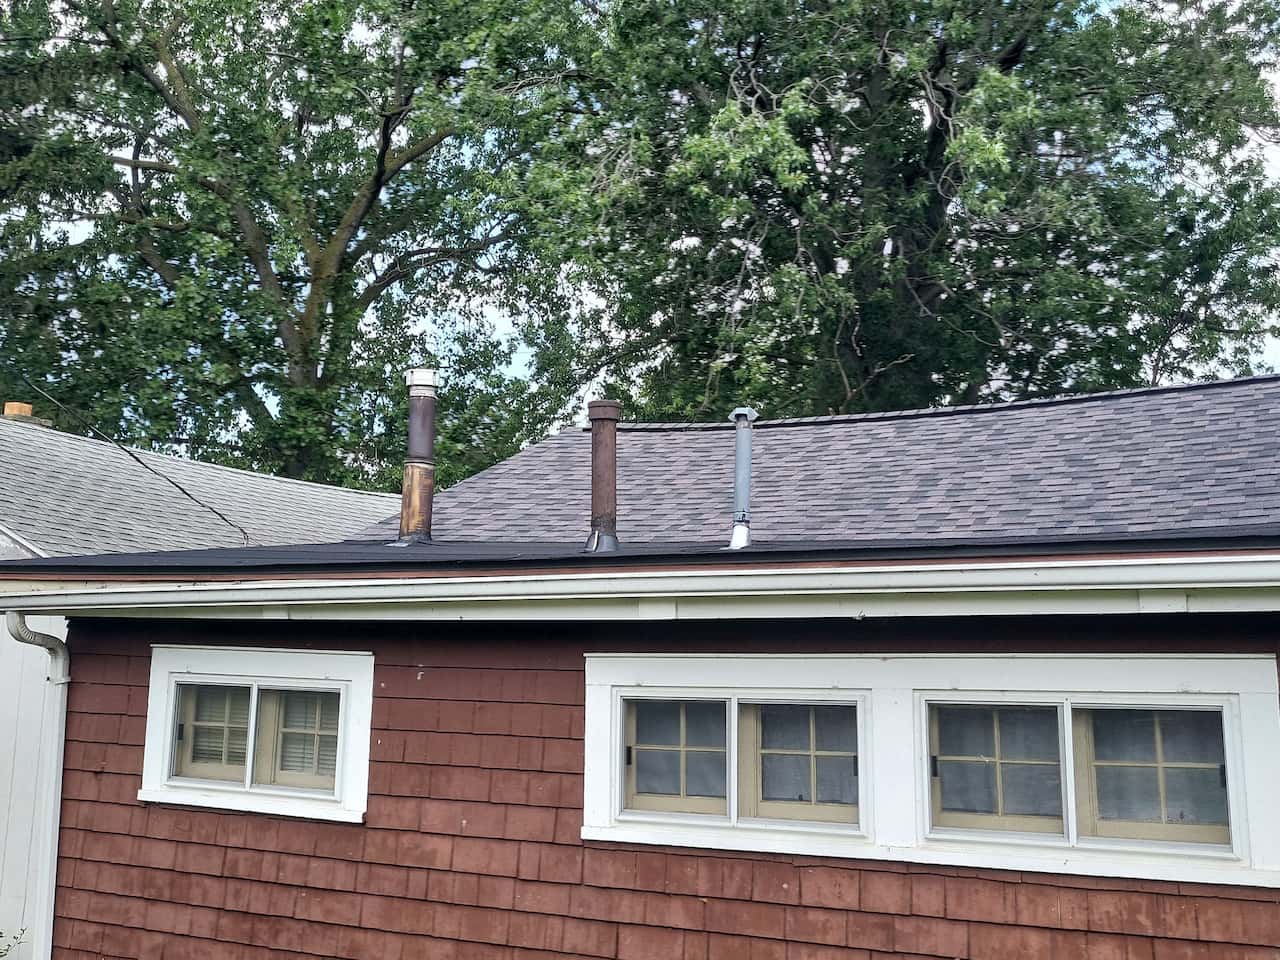 A house with a brown roof and two chimneys provides a beautiful backdrop for work or relaxation.